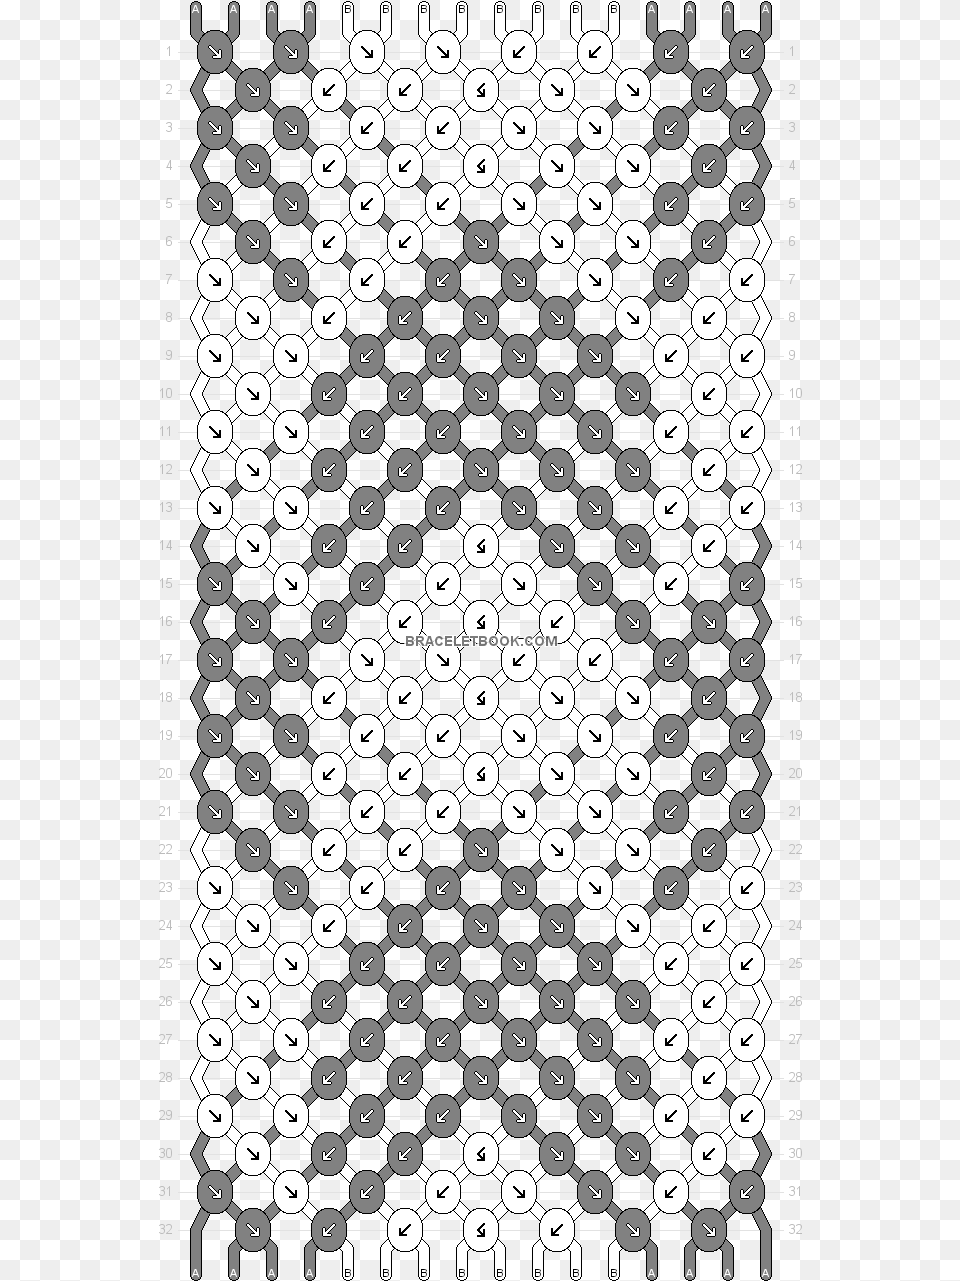 Normal Pattern Friendship Bracelet Patterns 3 Colors 6 Strings, Home Decor, Rug, Chess, Game Free Transparent Png